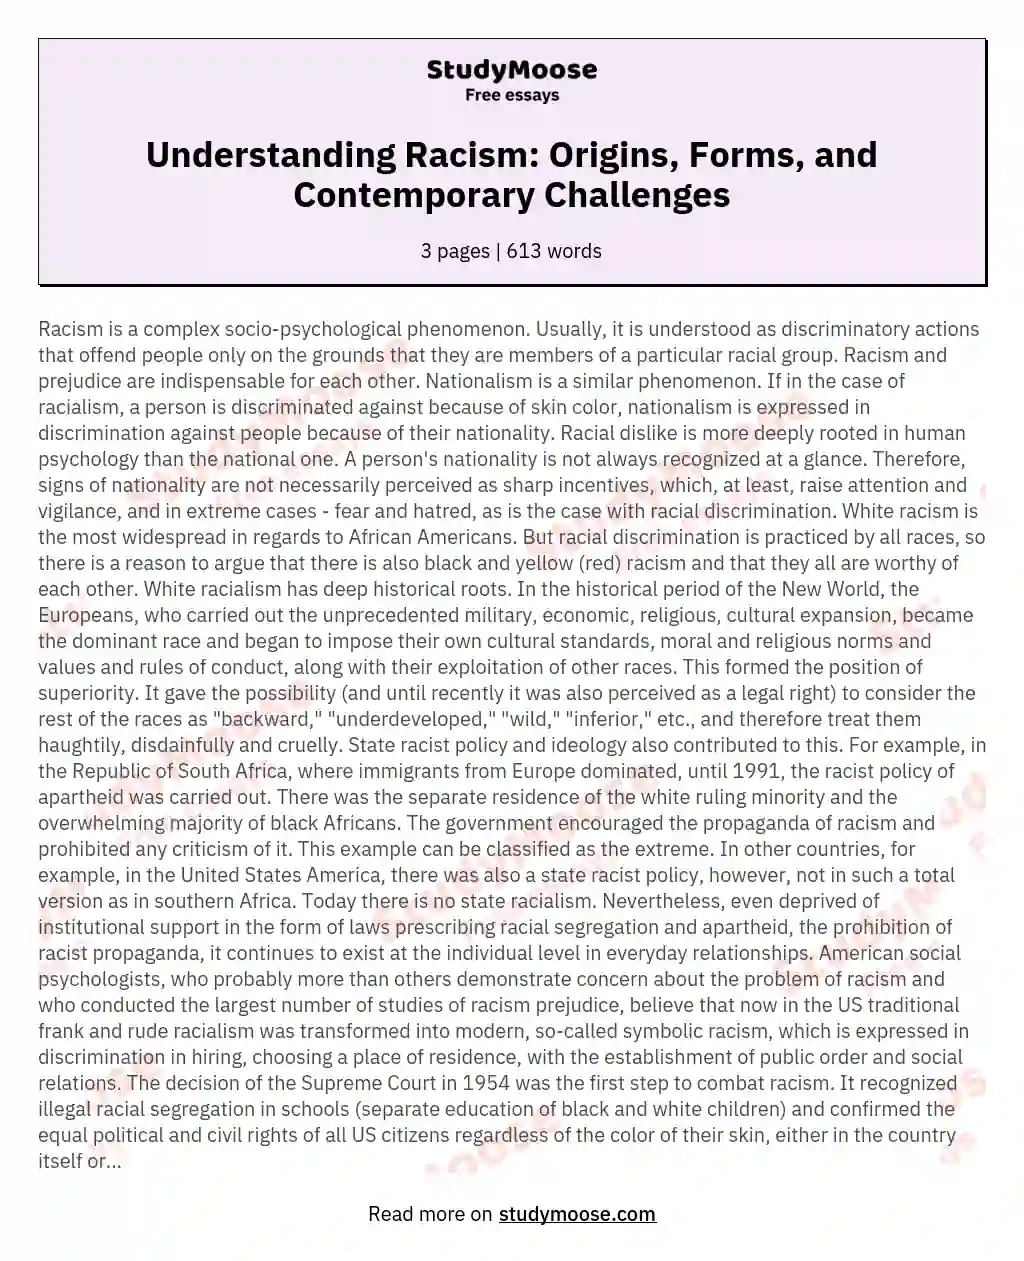 Understanding Racism: Origins, Forms, and Contemporary Challenges essay